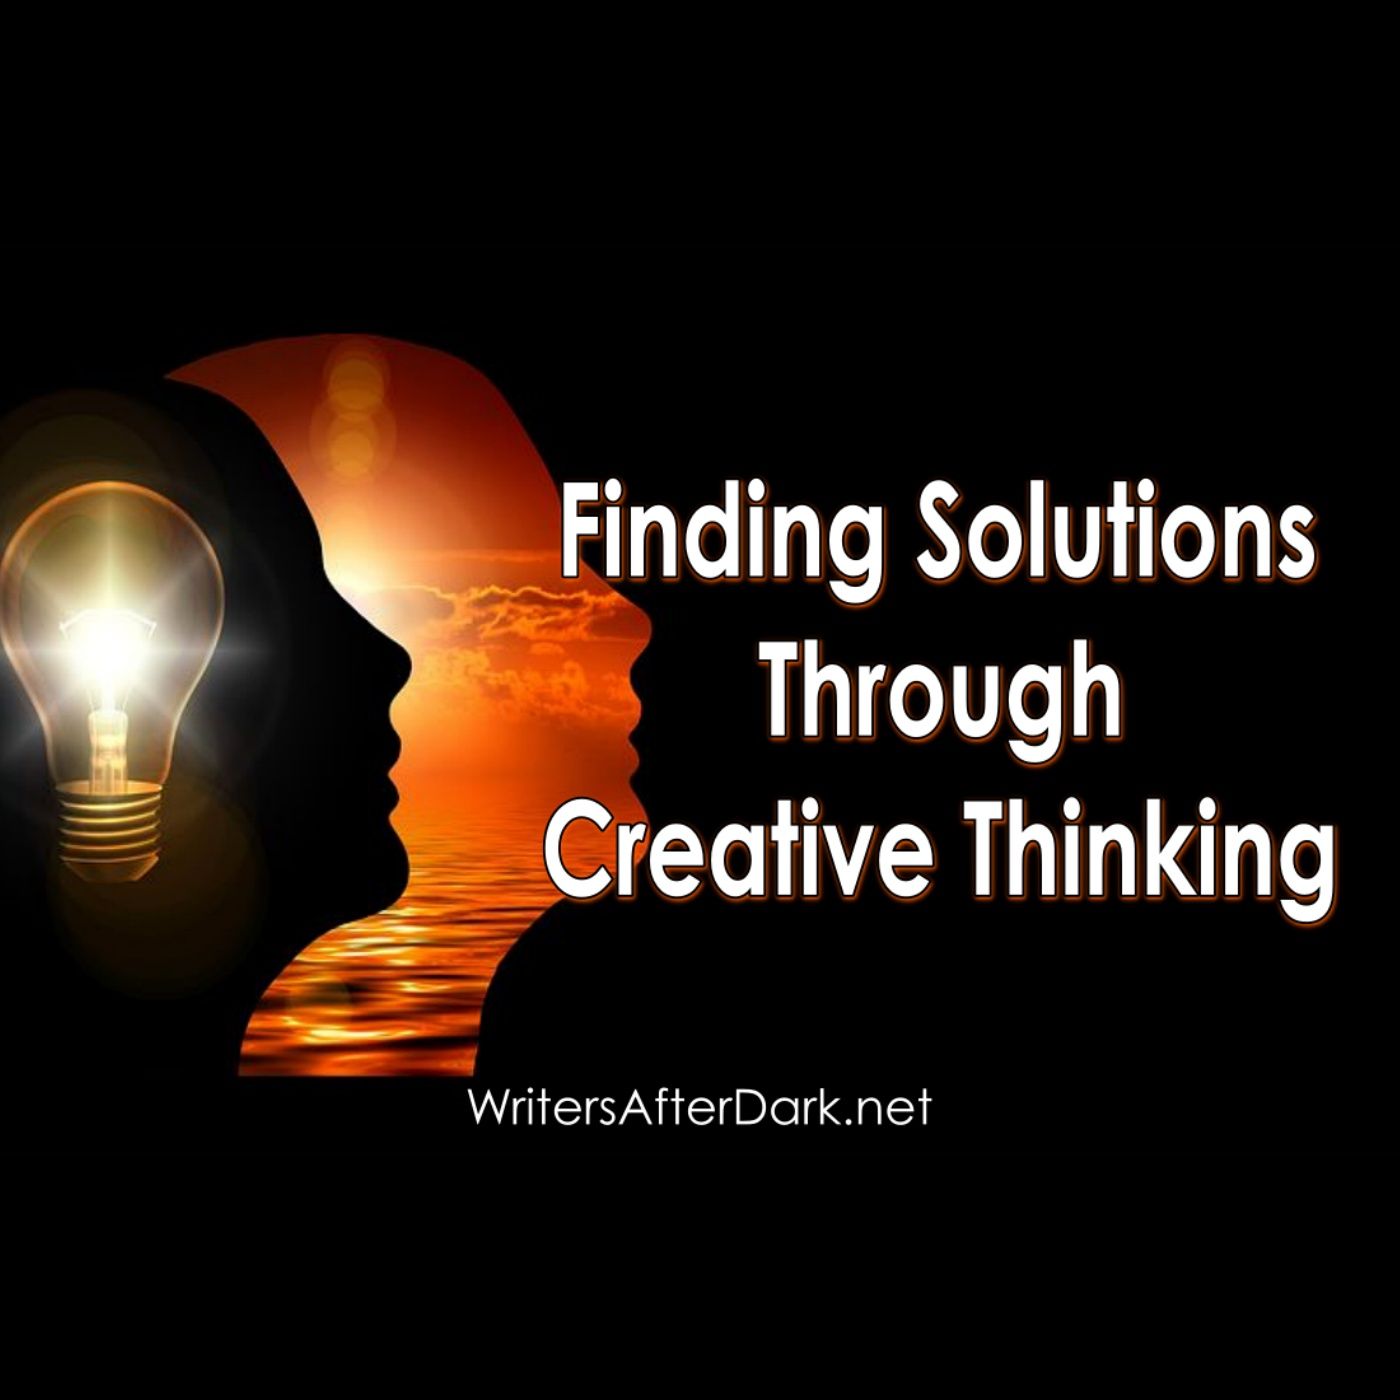 Finding Solutions Through Creative Thinking